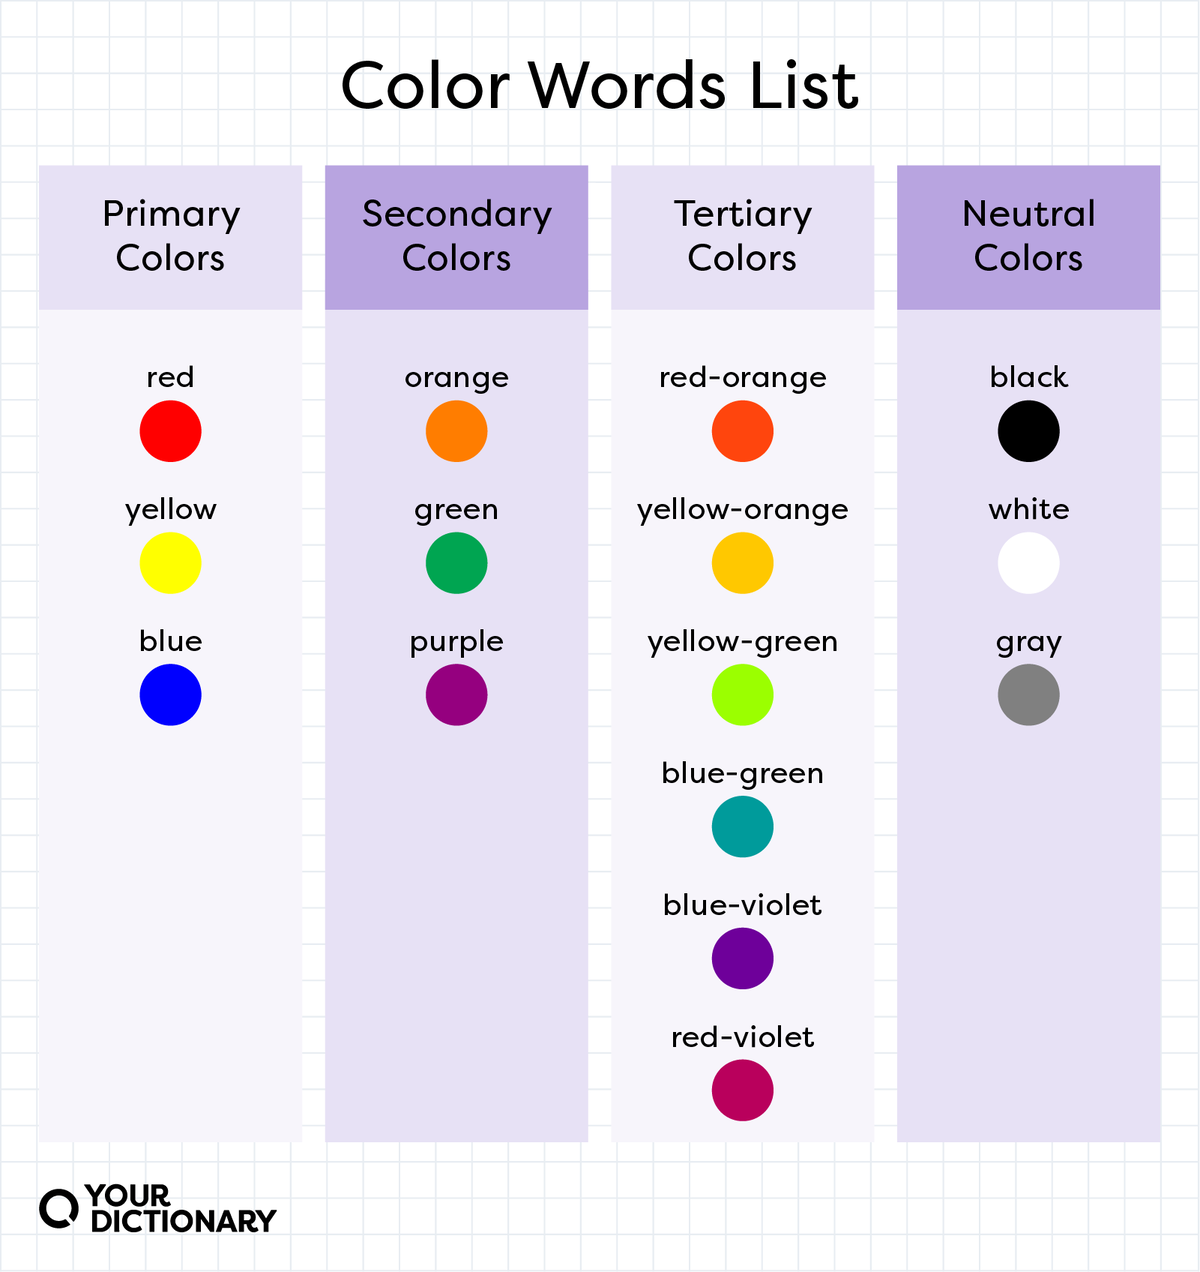 List of primary, secondary, tertiary, and neutral colors from the article.